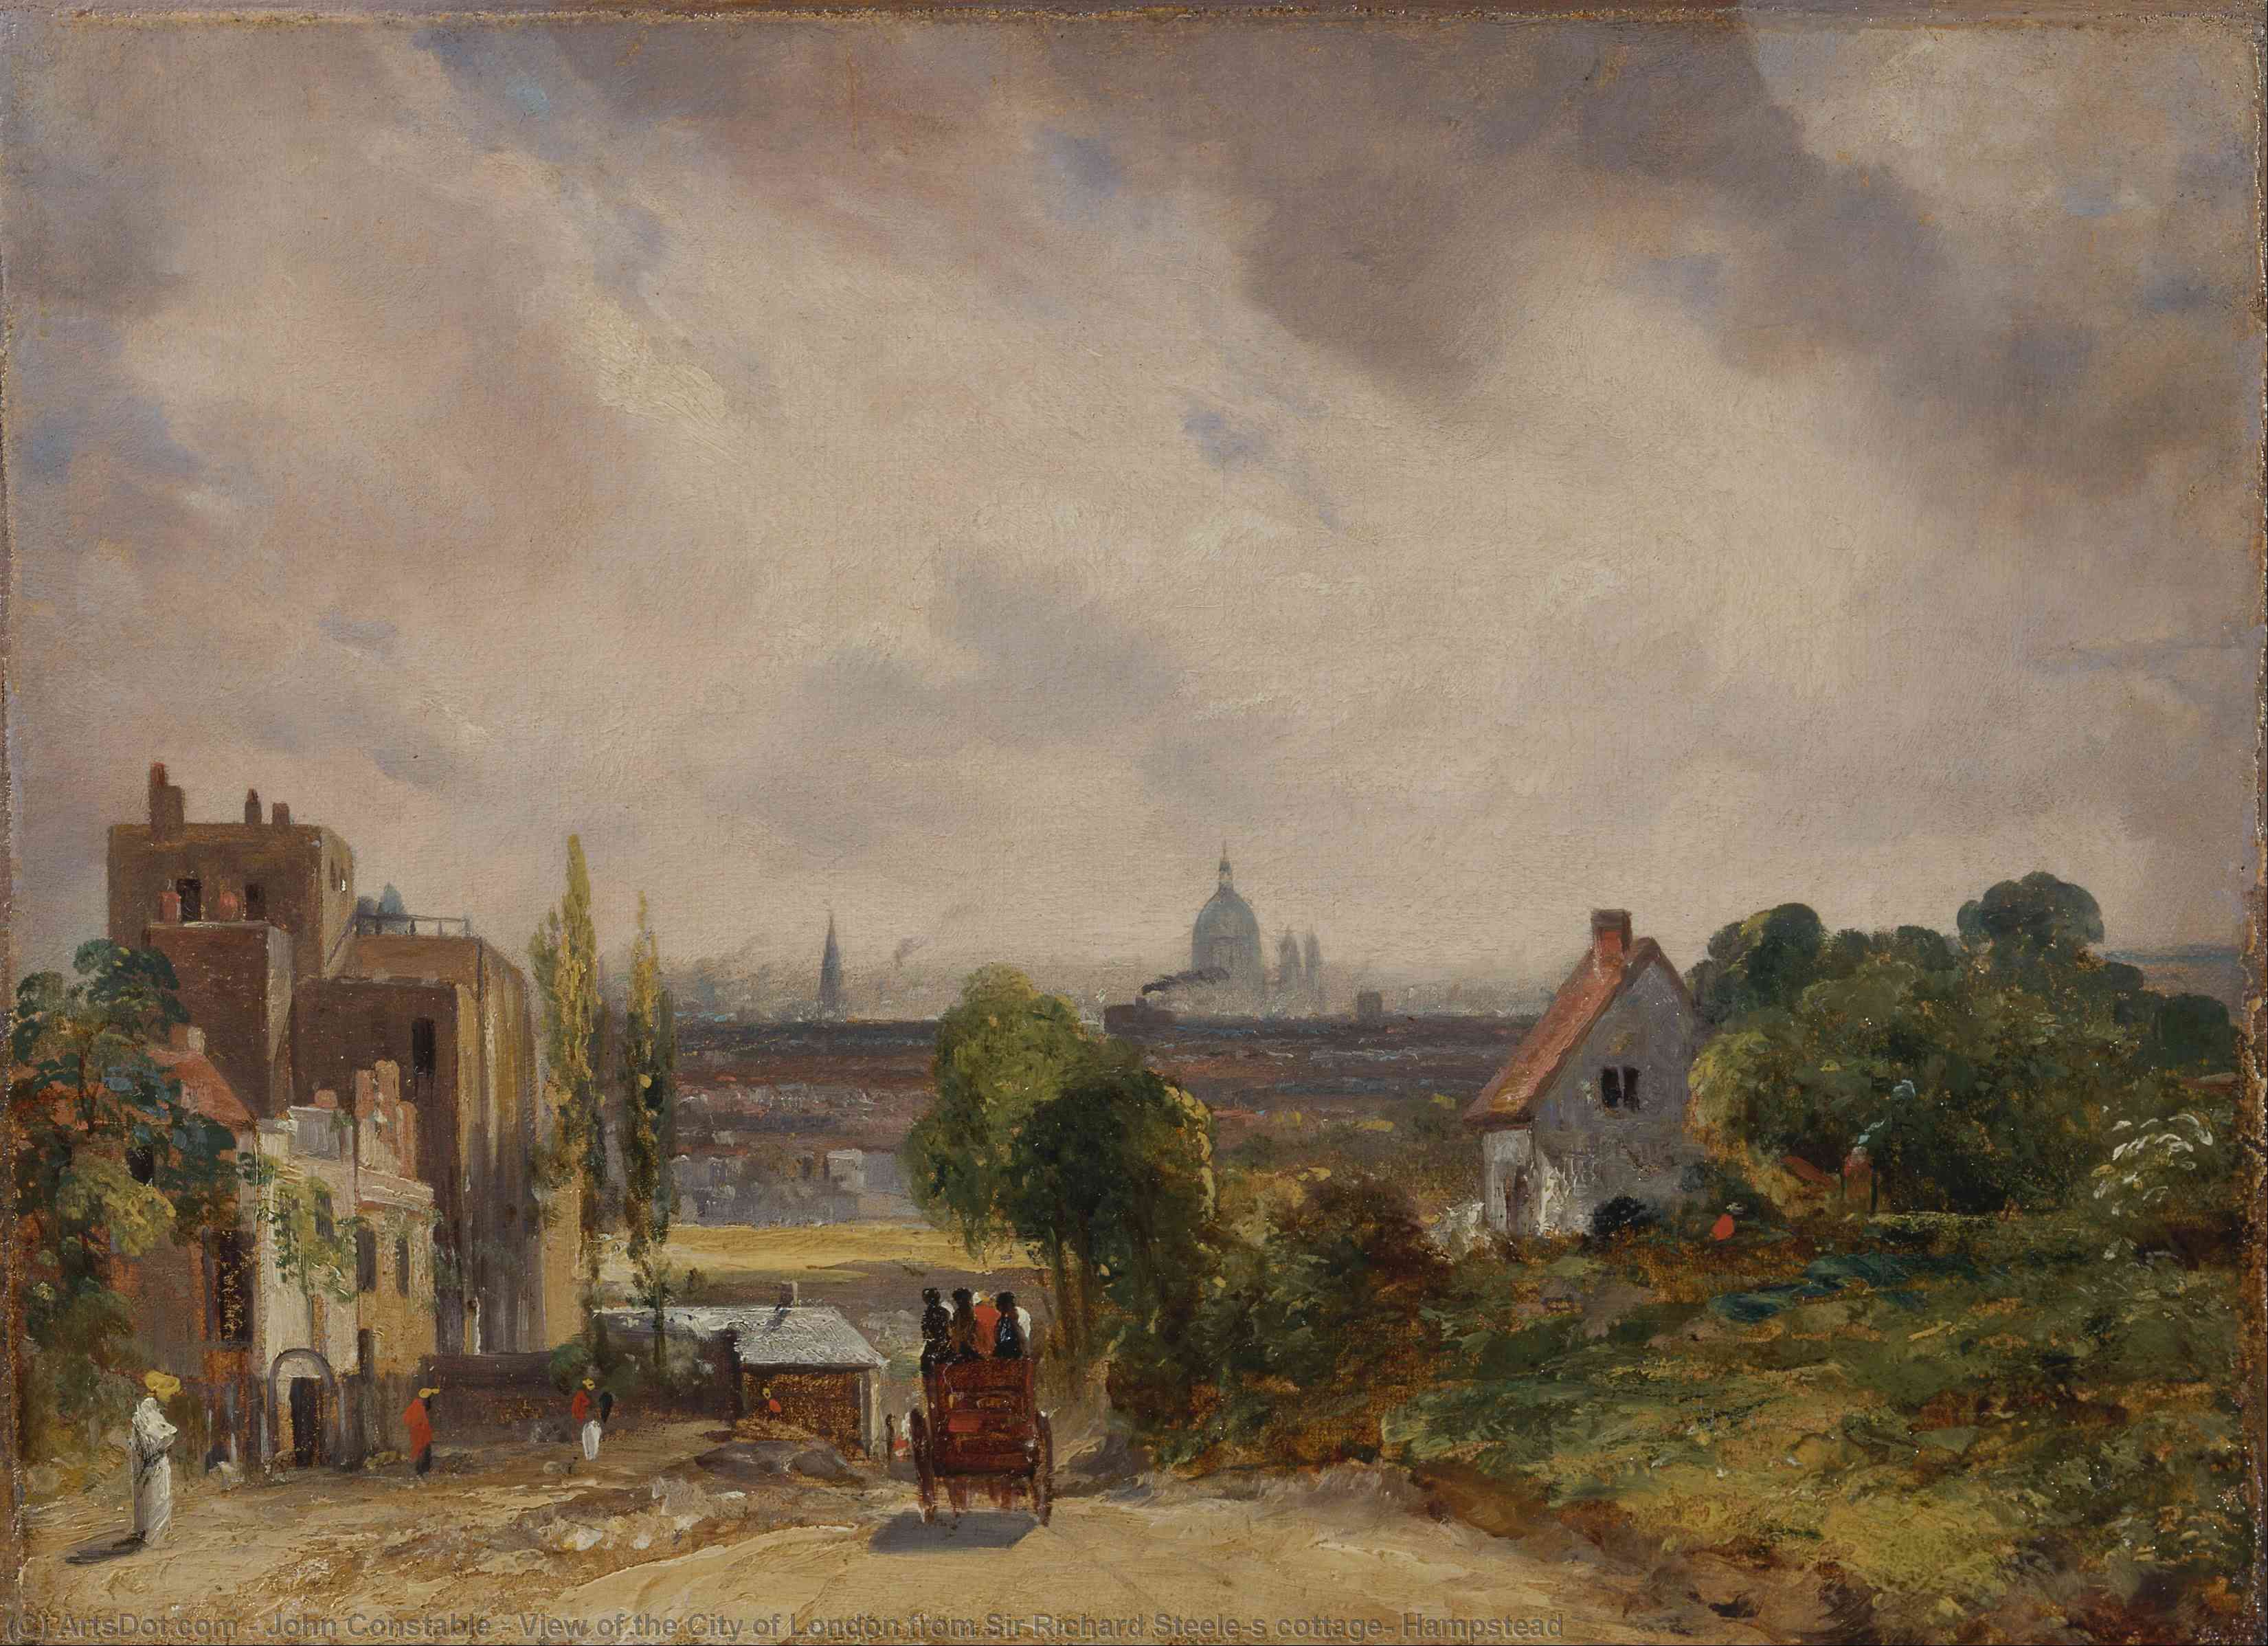 WikiOO.org - Encyclopedia of Fine Arts - Maľba, Artwork John Constable - View of the City of London from Sir Richard Steele's cottage, Hampstead